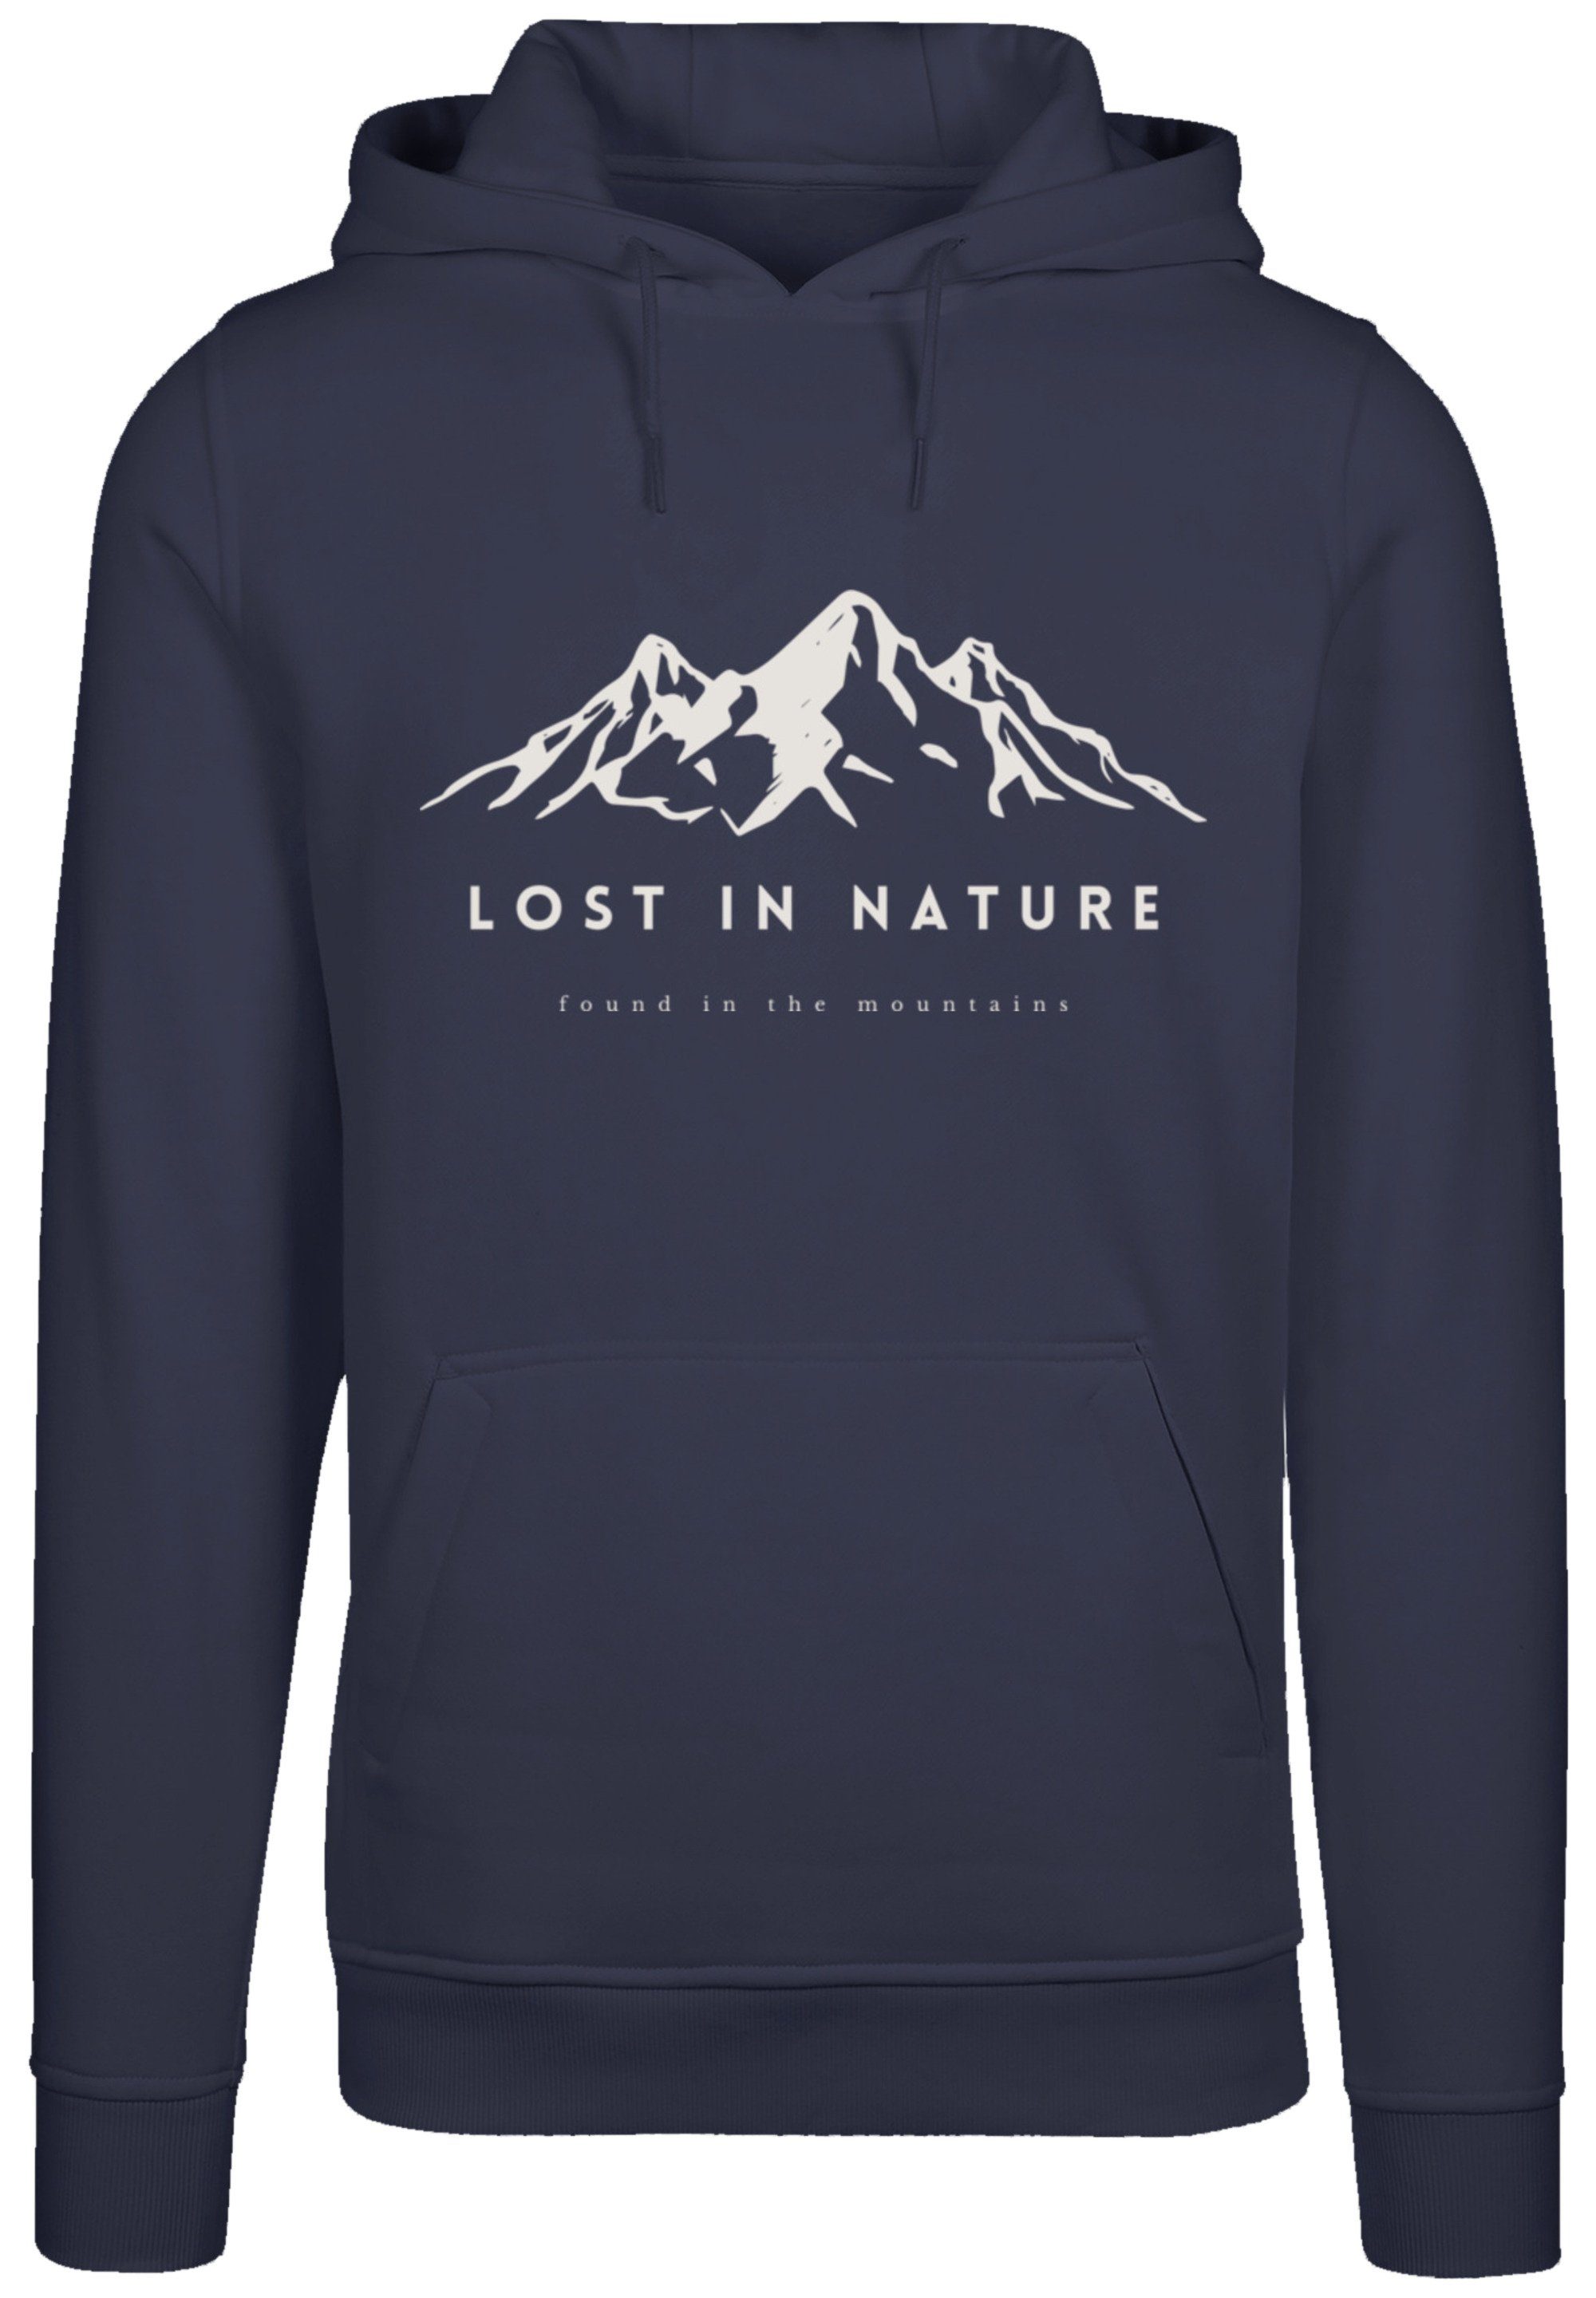 F4NT4STIC Kapuzenpullover Lost in nature Hoodie, Warm, Bequem navy